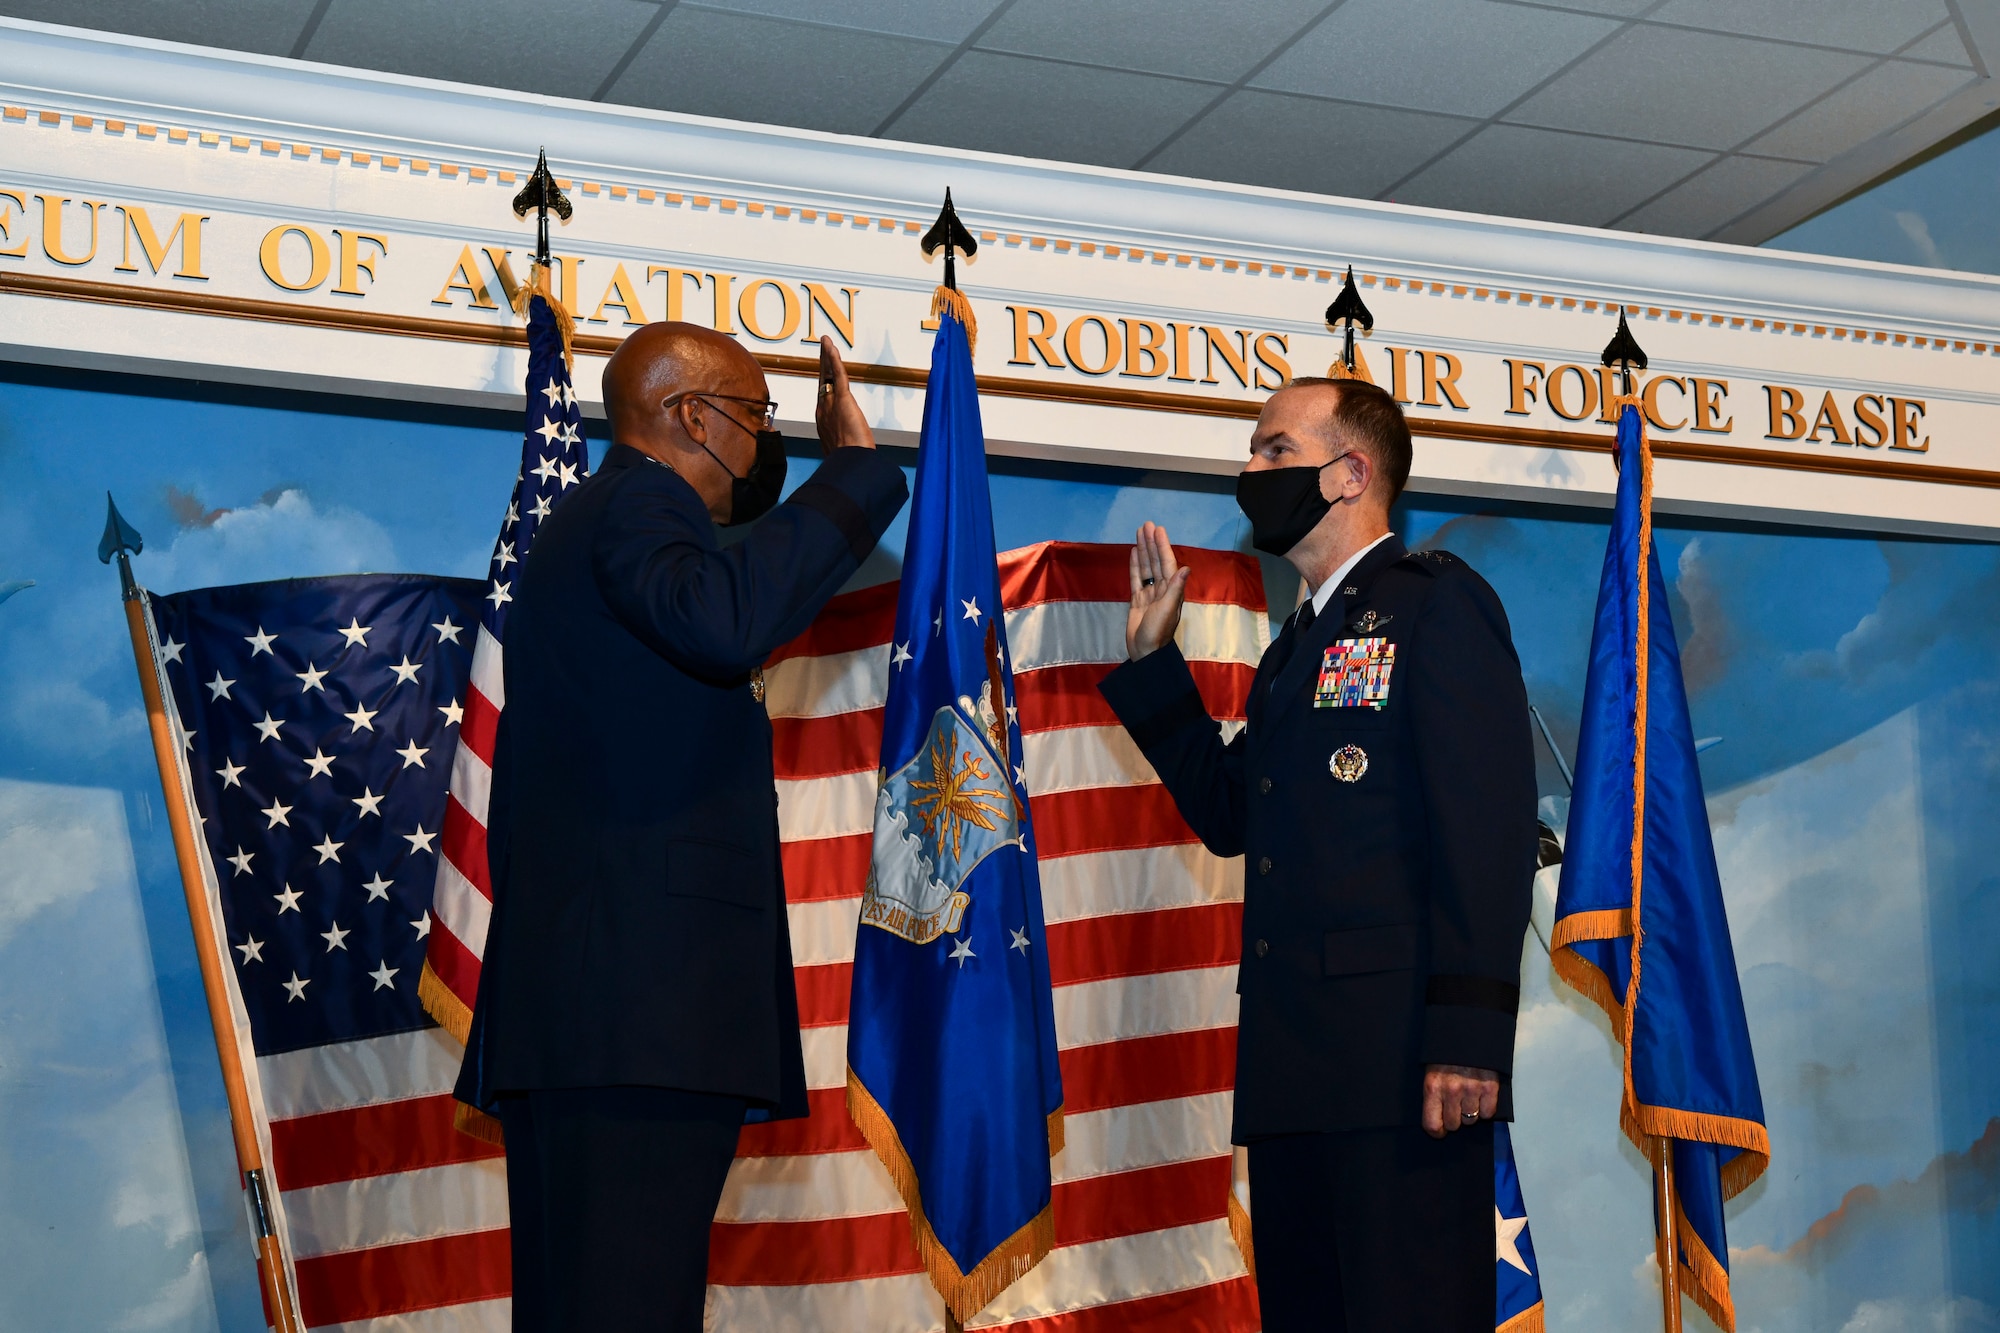 Air Force Chief of Staff Gen. CQ Brown, Jr., administers the oath of office to Lt. Gen. John Healy on stage